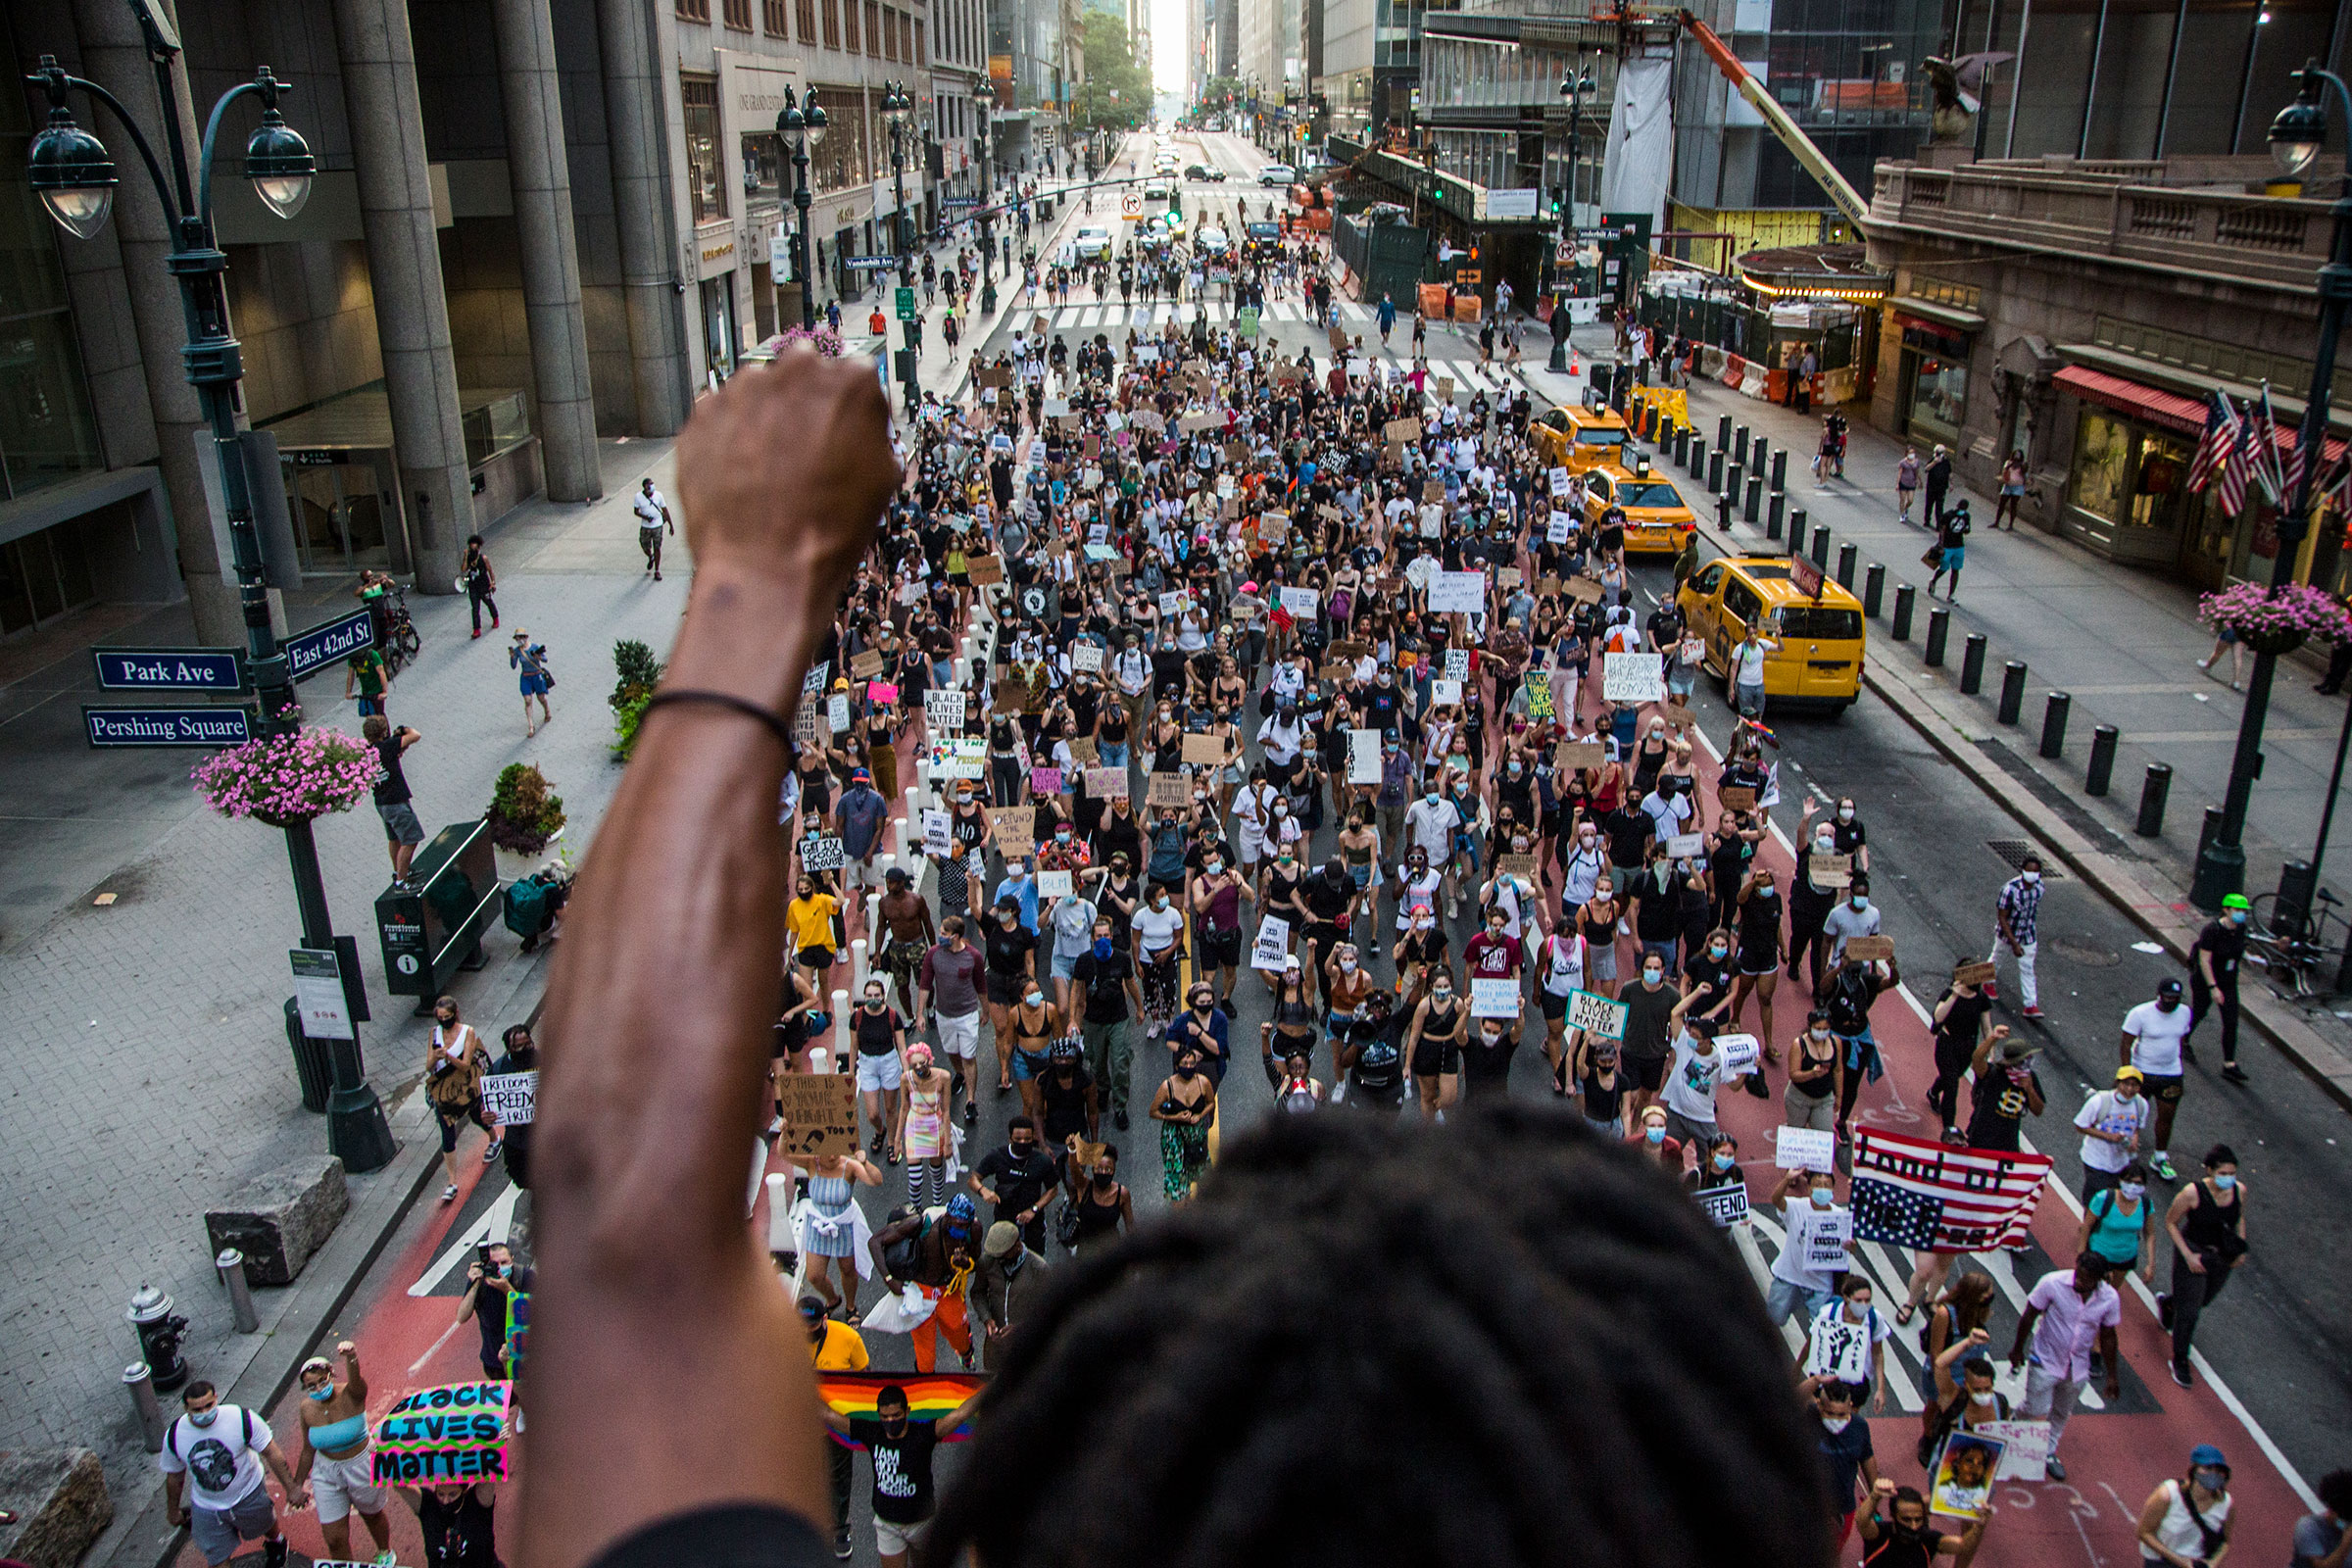 A man raises his arm in support of the crowd of protesters marching in downtown New York, NY on July 26, 2020. (Pablo Monsalve—VIEWpress/Getty Images)